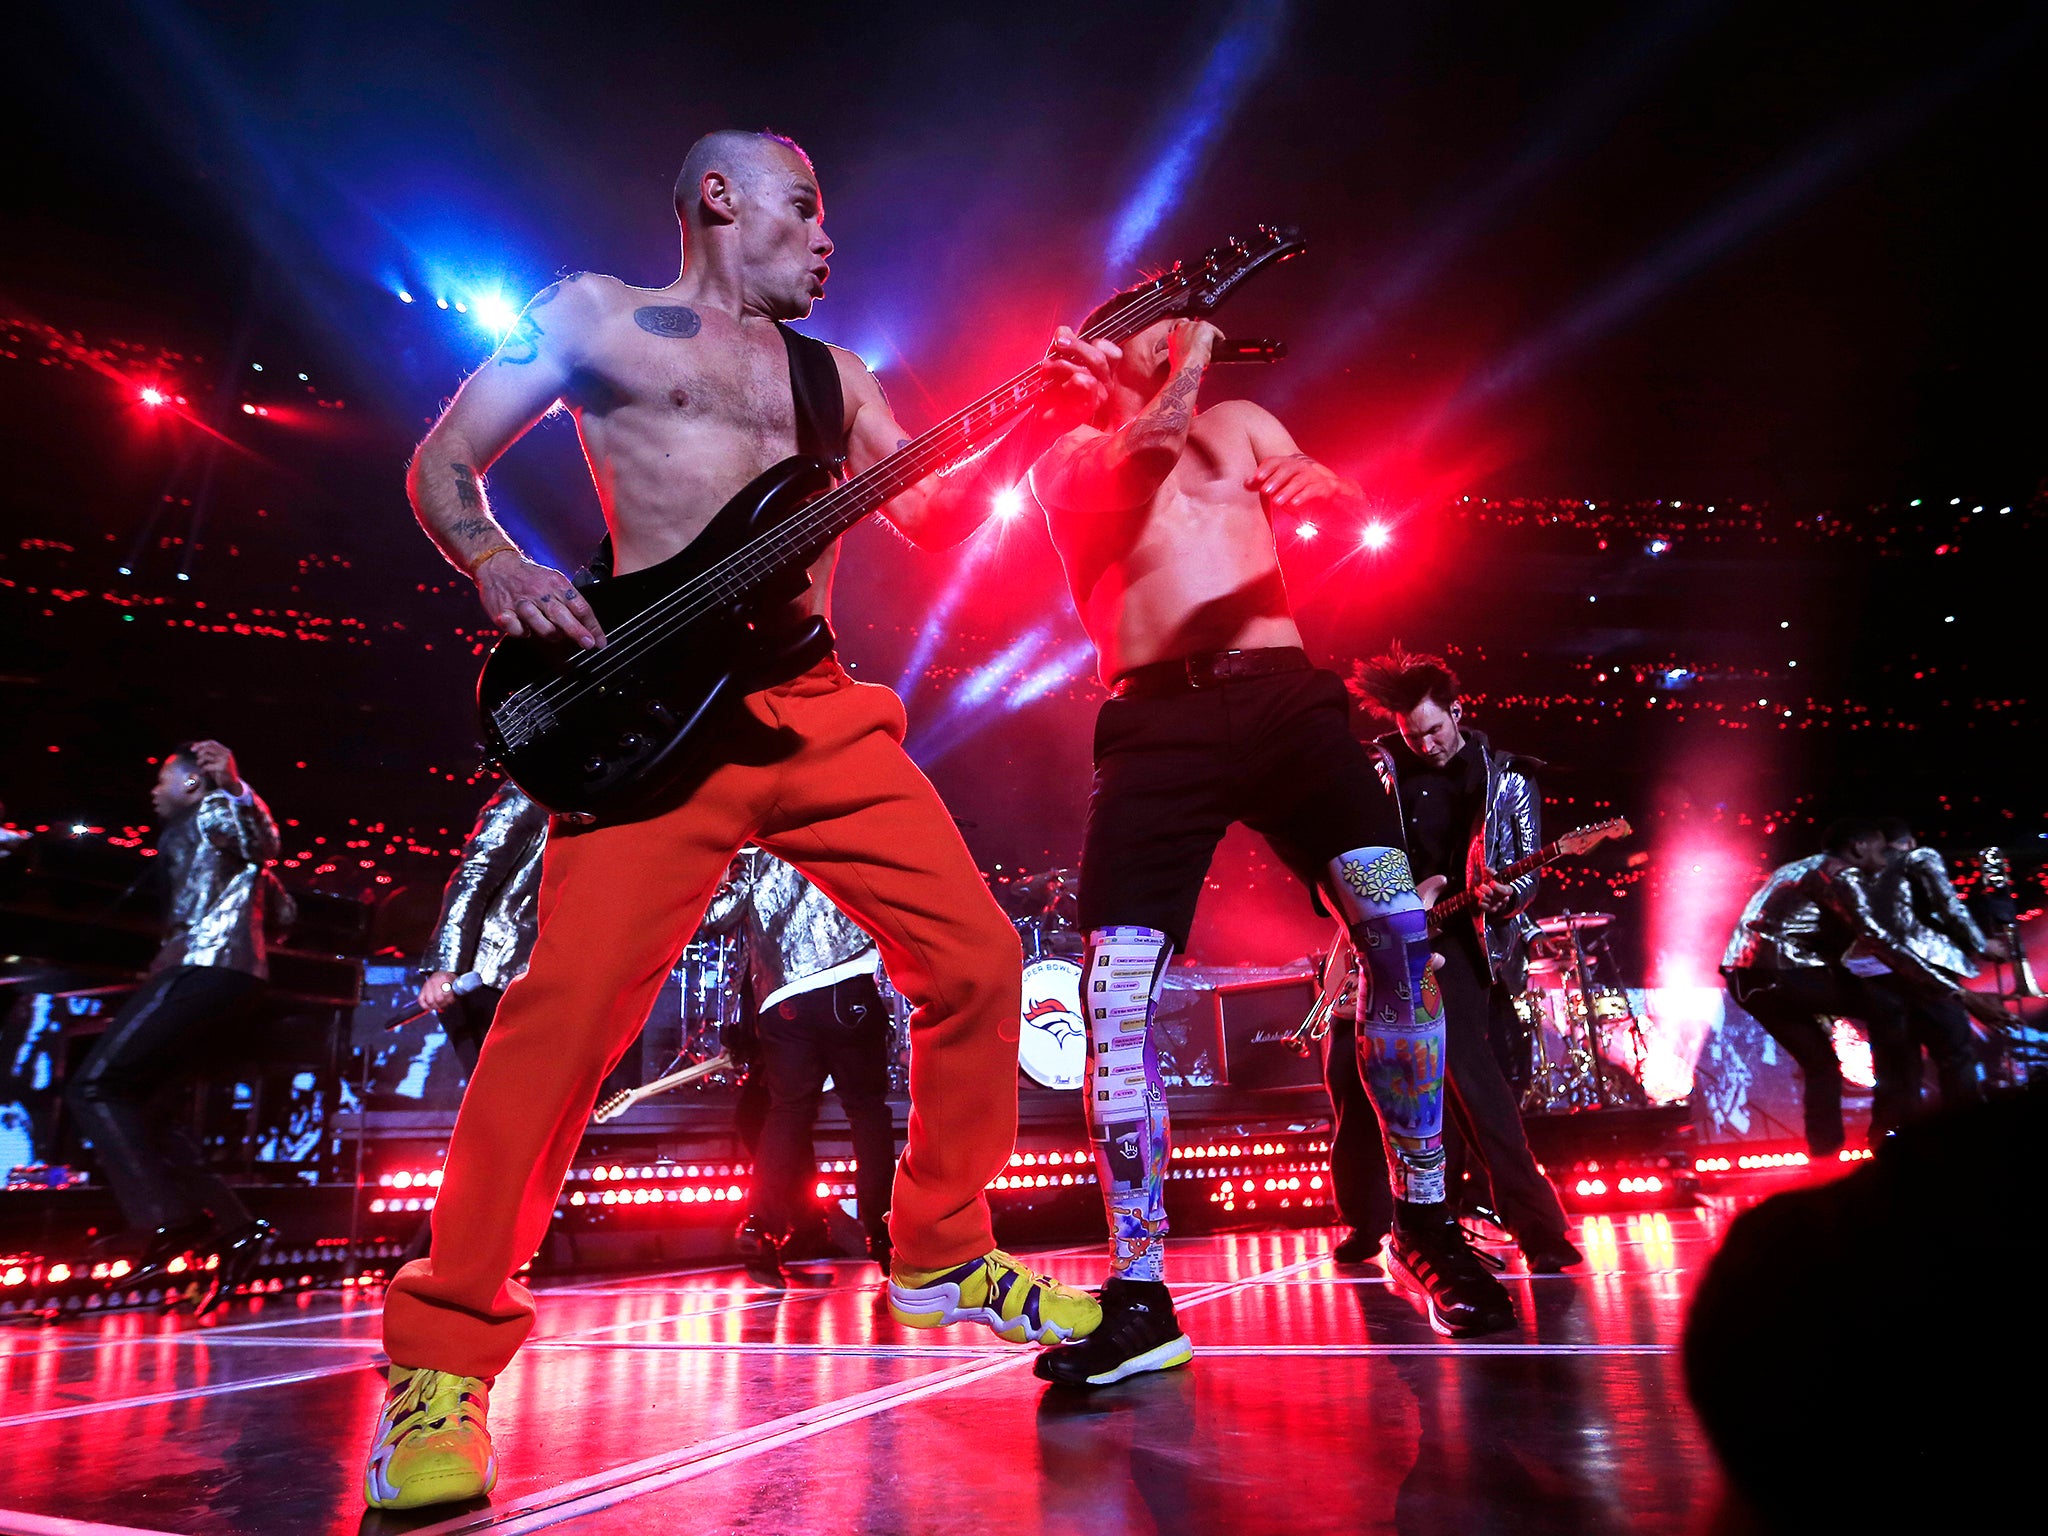 The Red Hot Chili Peppers perform during the Pepsi Super Bowl XLVIII Halftime Show at MetLife Stadium on February 2, 2014 in East Rutherford, New Jersey. (Photo by Jamie Squire/Getty Images)